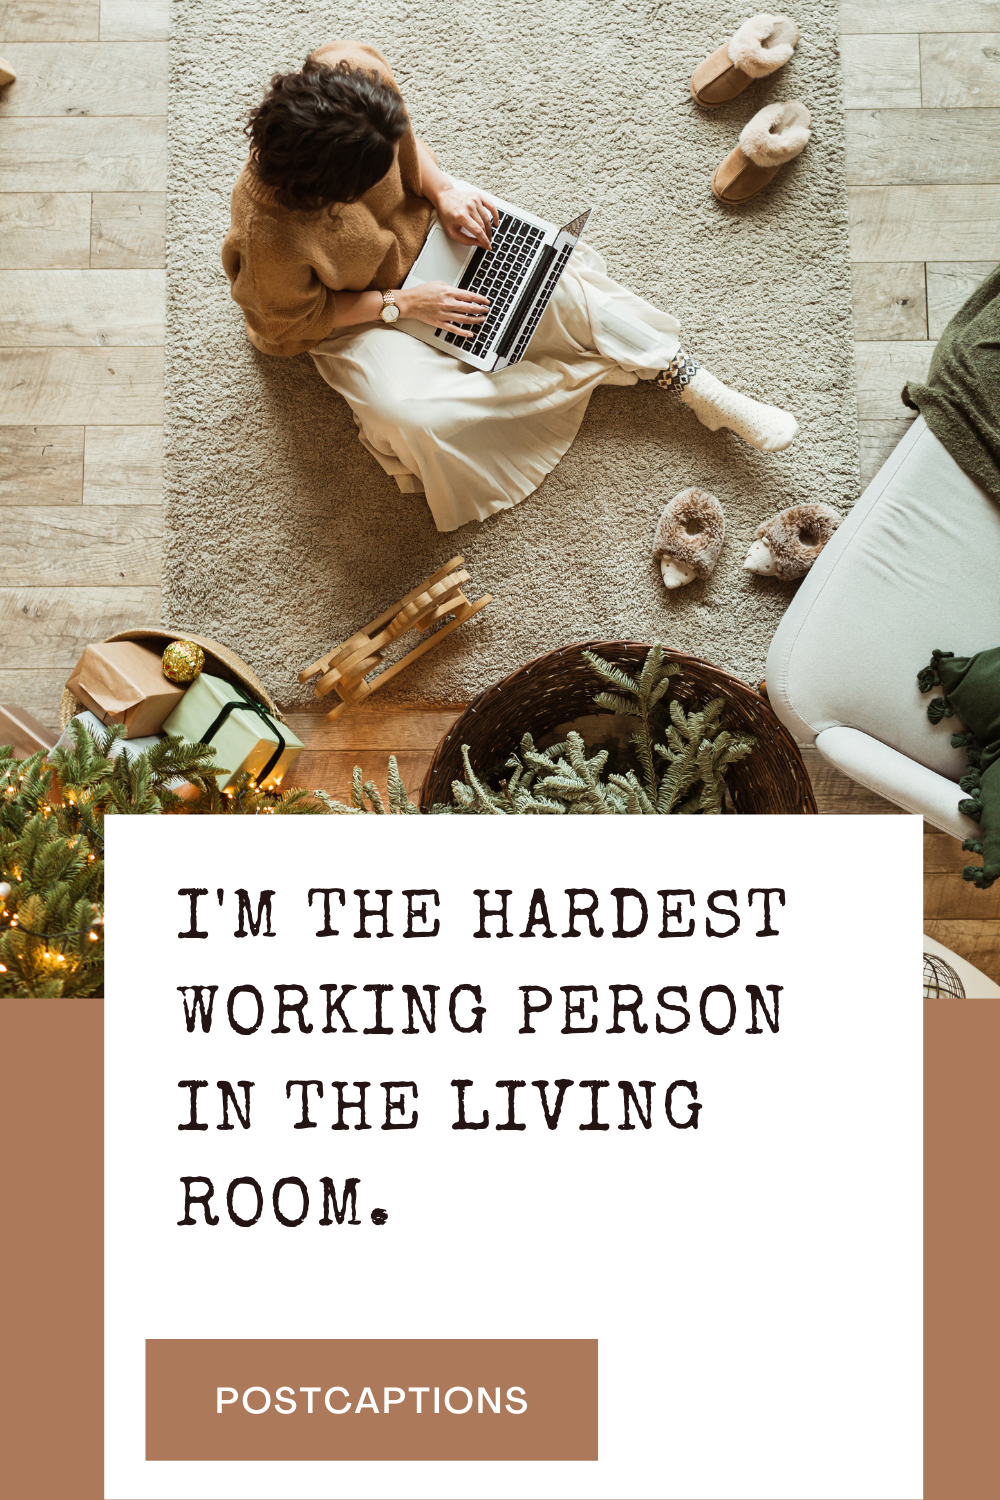 Funny work from home captions